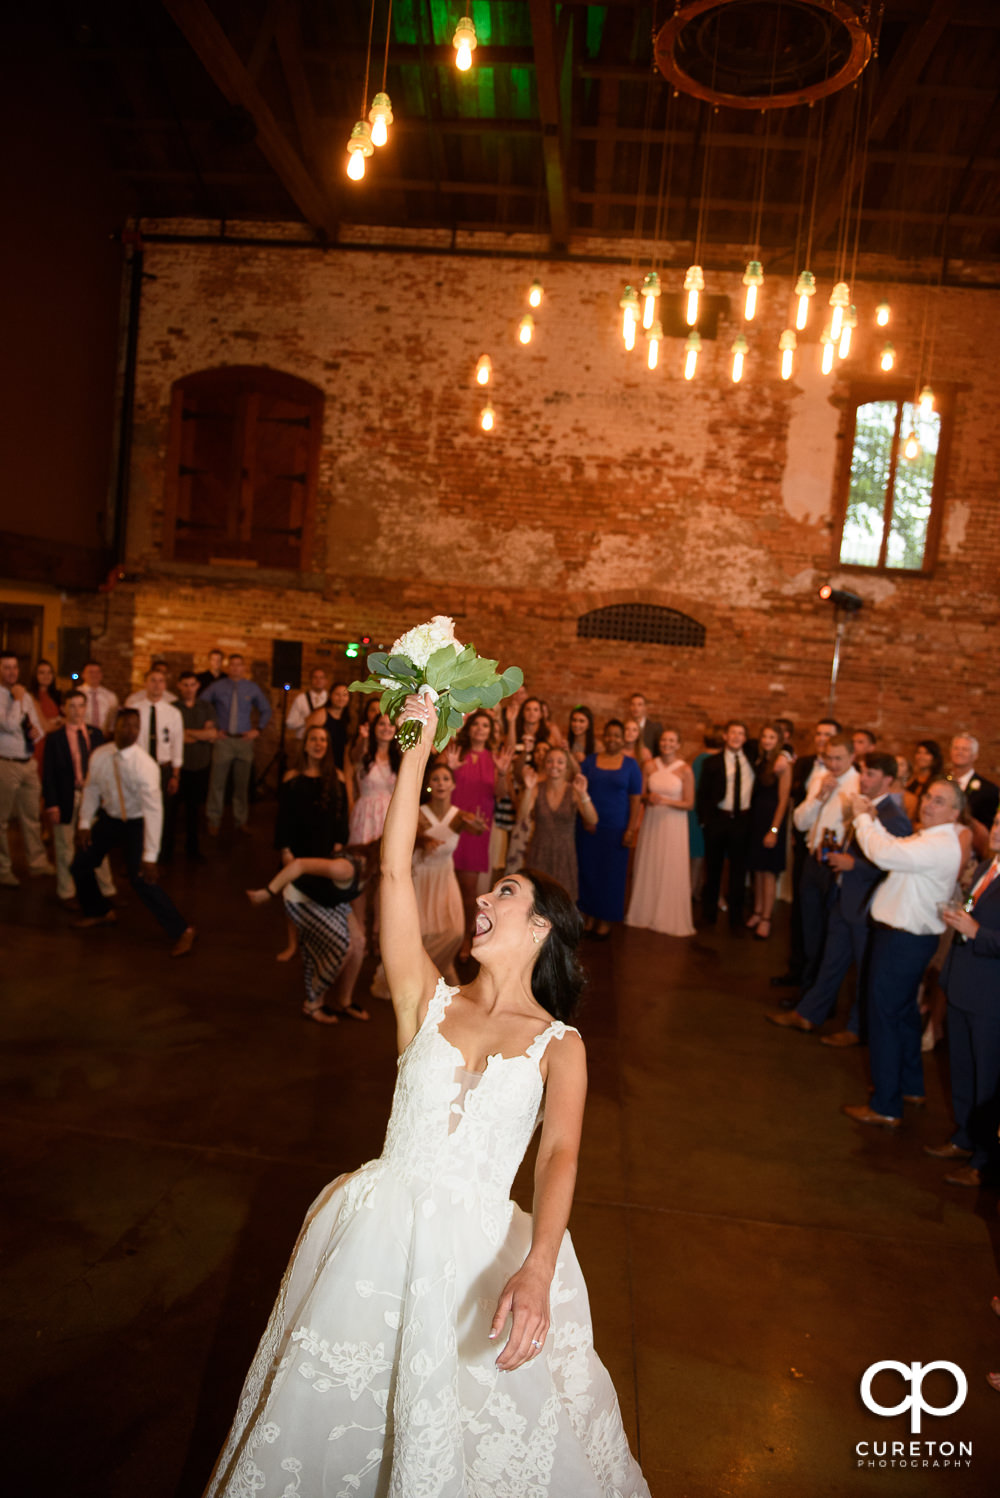 Bride tossing the bouquet.